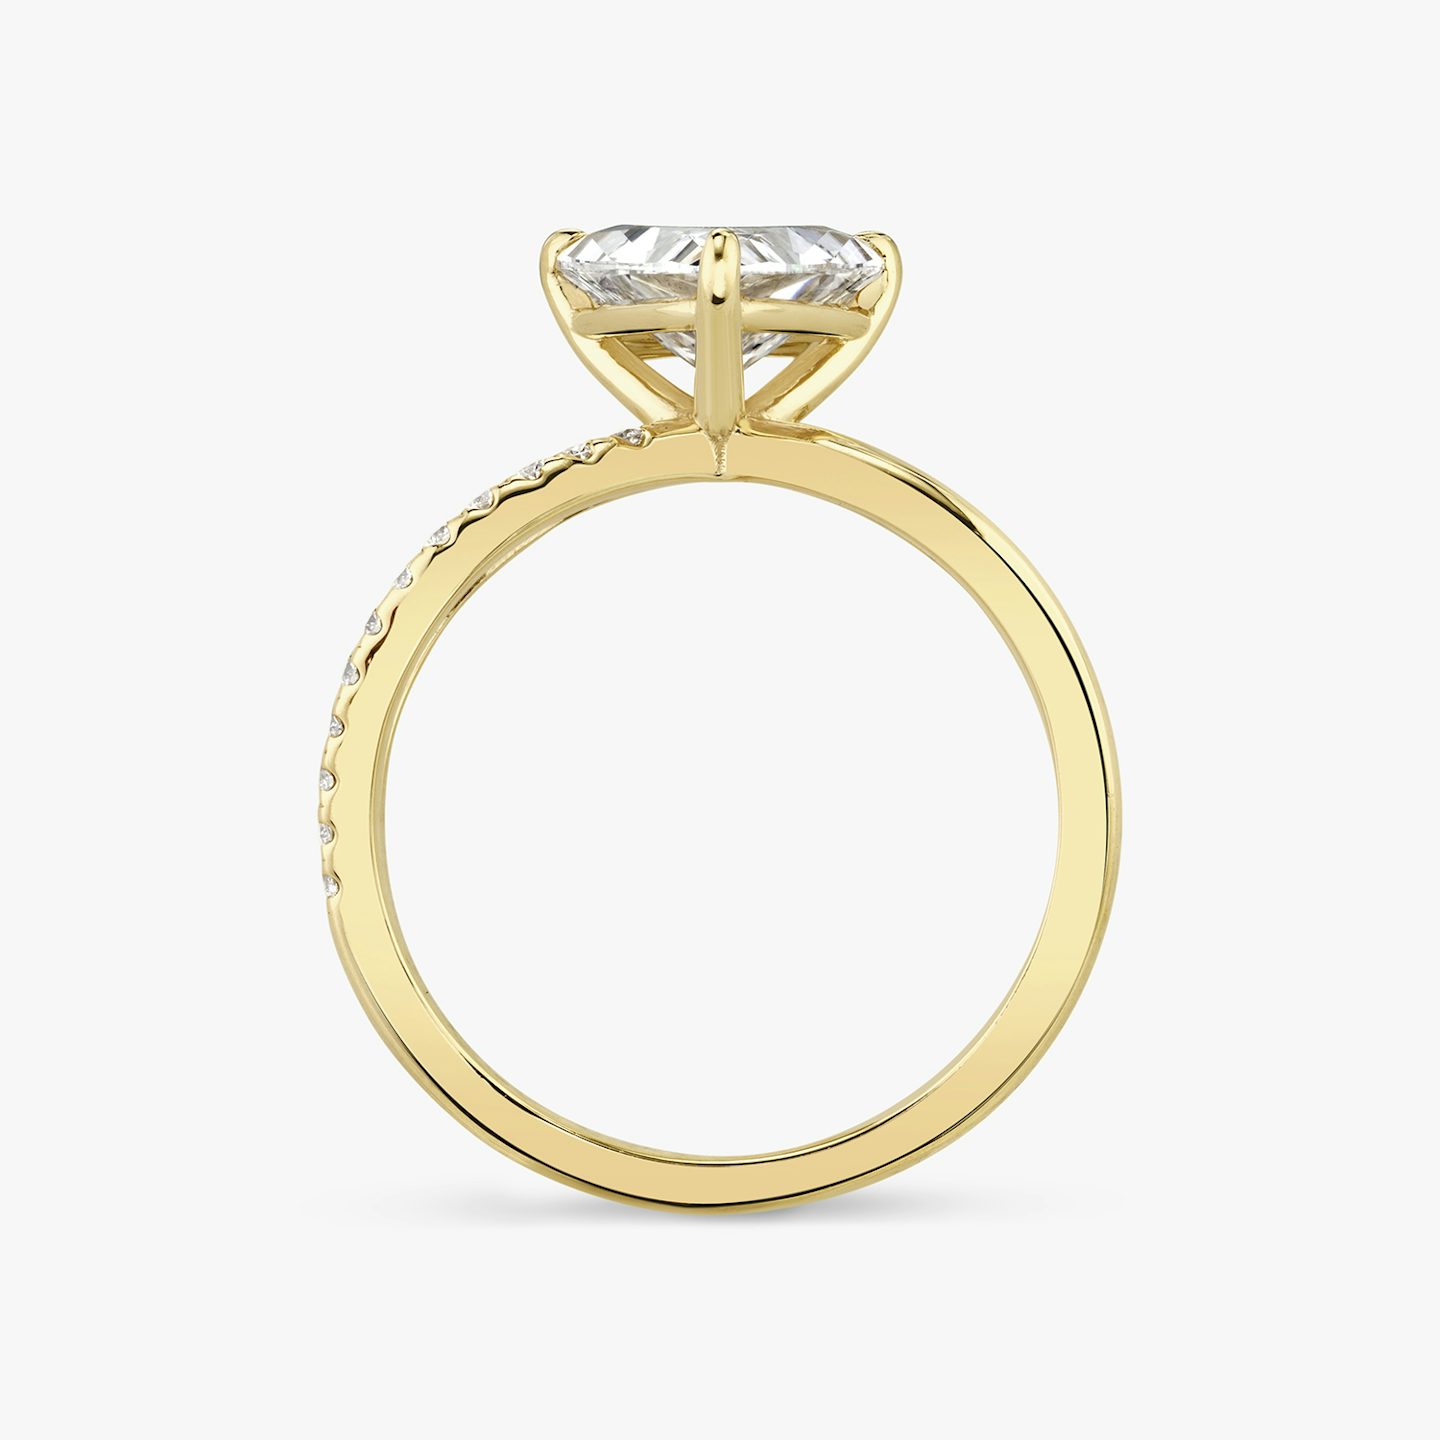 The Duet | trillion | 18k | yellow-gold | bandAccent: pave | diamondOrientation: vertical | caratWeight: other